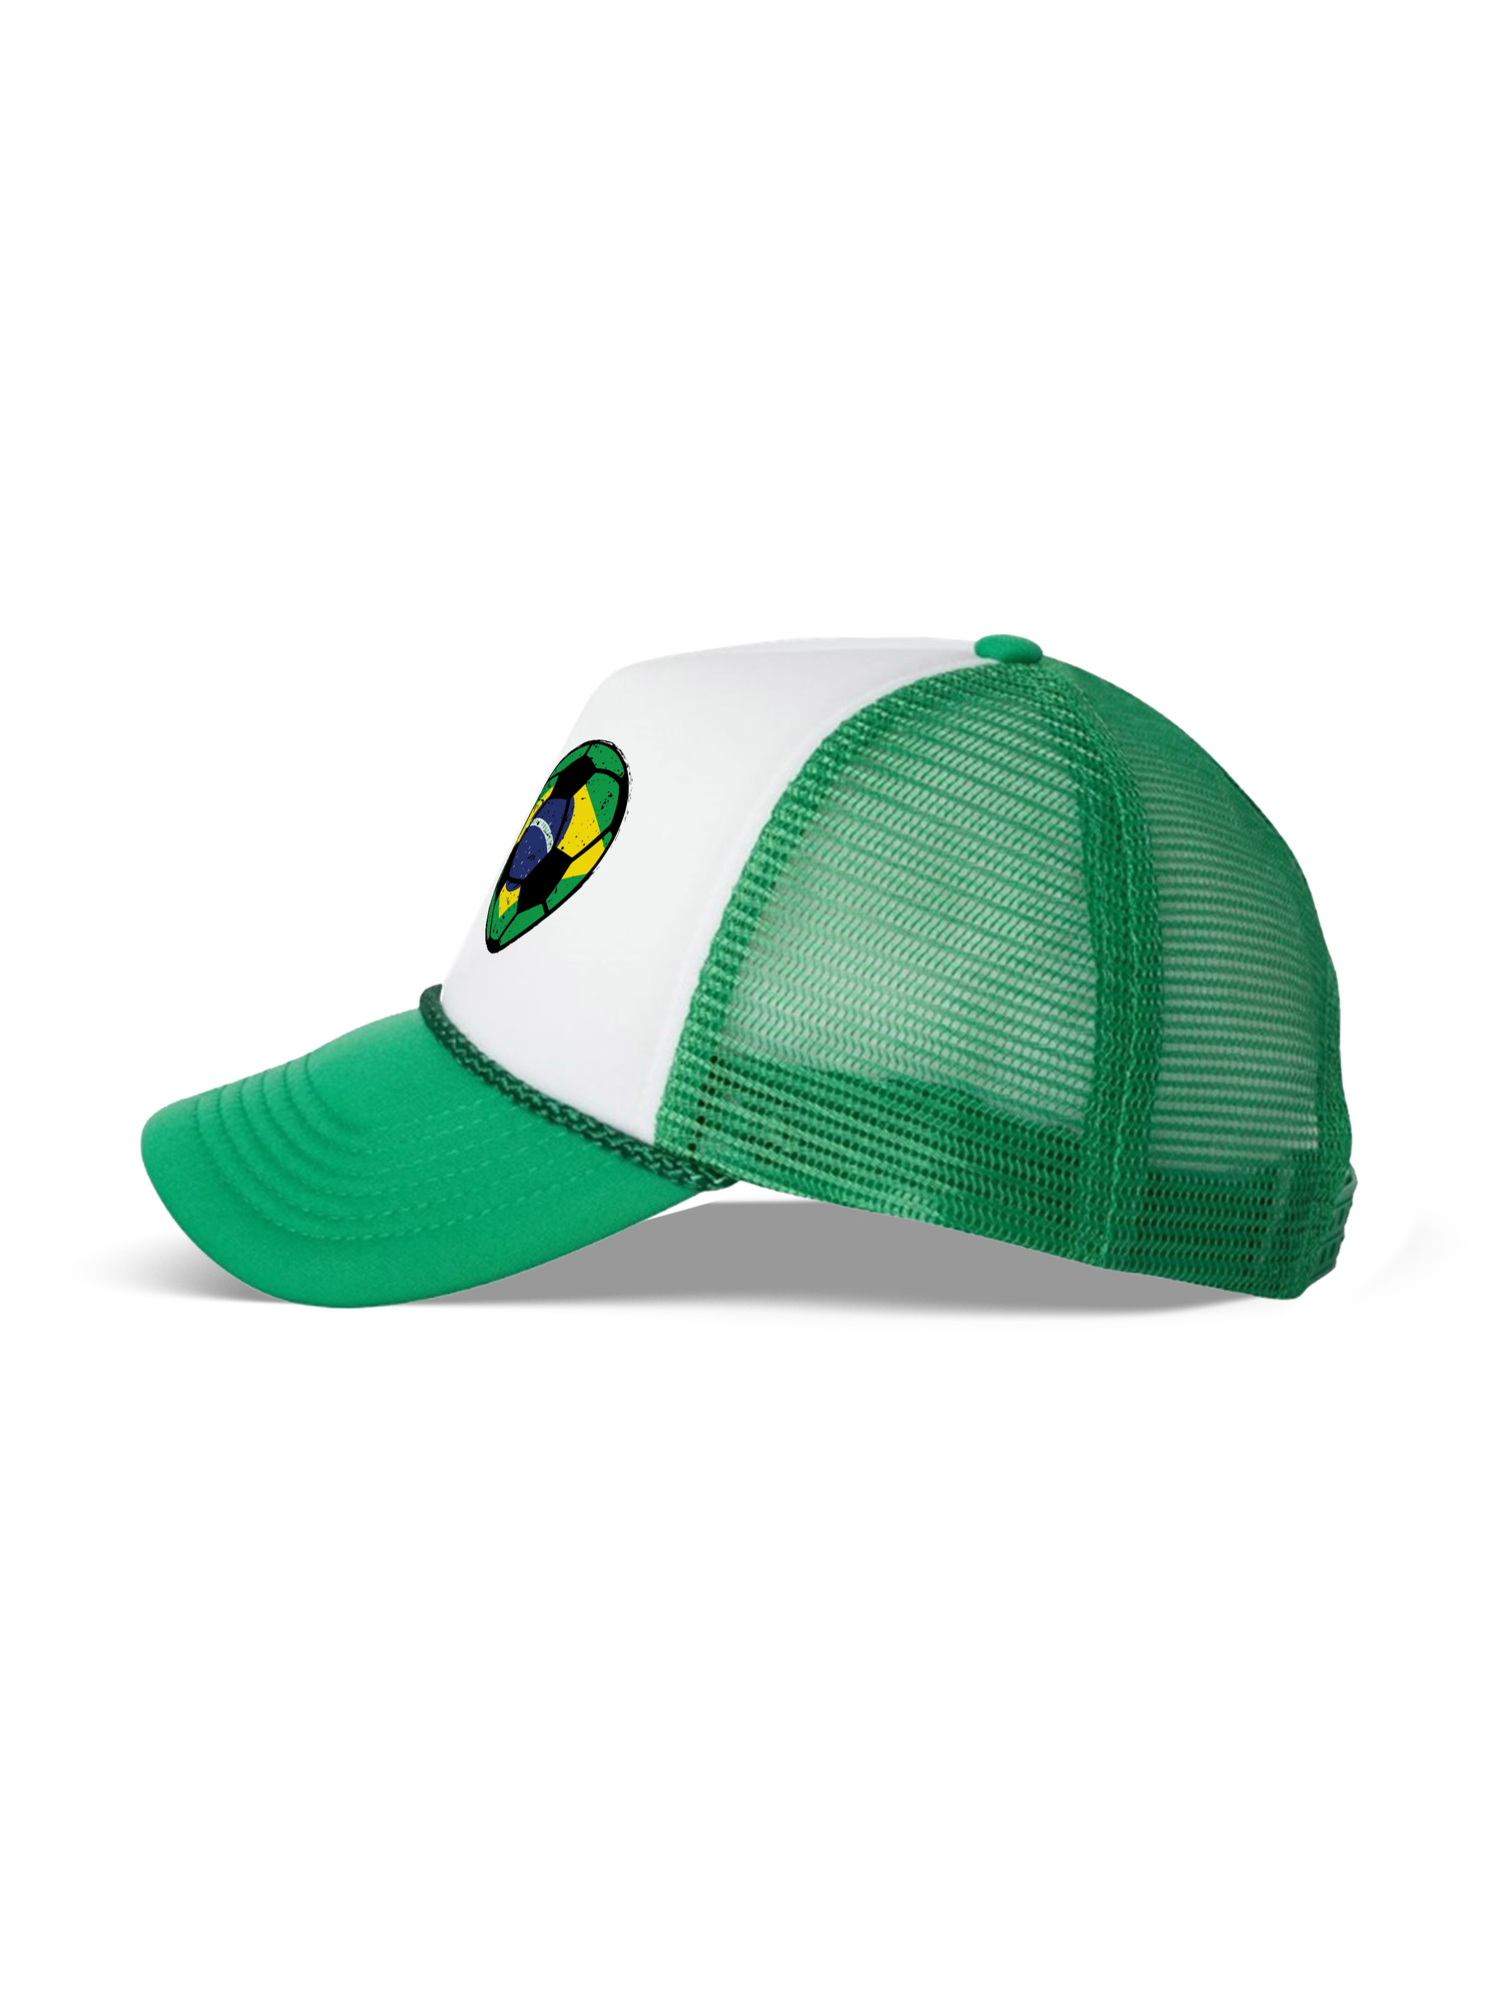 Awkward Styles Brazil Soccer Ball Hat Brazilian Soccer Trucker Hat Brazil 2018 Baseball Cap Brazil Trucker Hats for Men and Women Hat Gifts from Brazil Brazilian Baseball Hats Brazilian Flag Hat - image 3 of 6